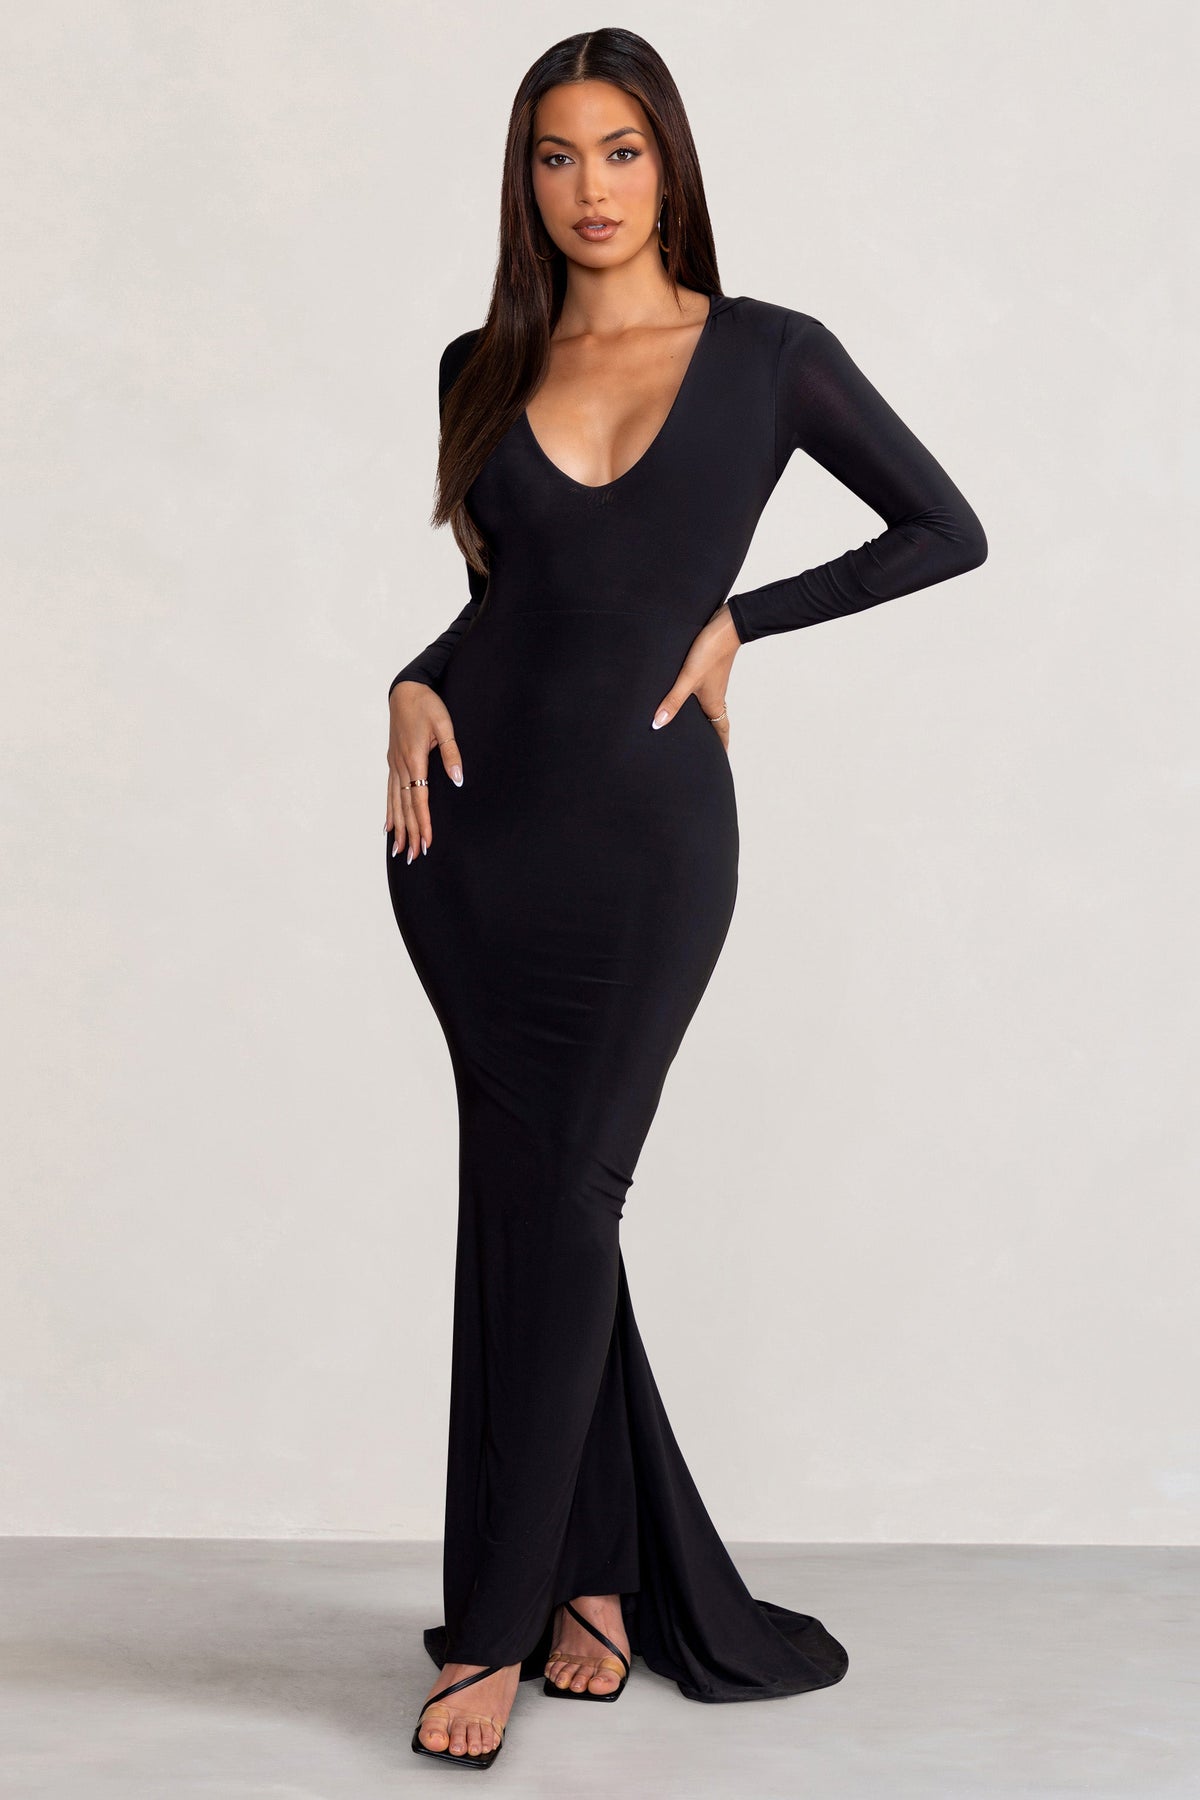 Adore Black Long Sleeve Plunge Maxi Dress with Hood – Club L